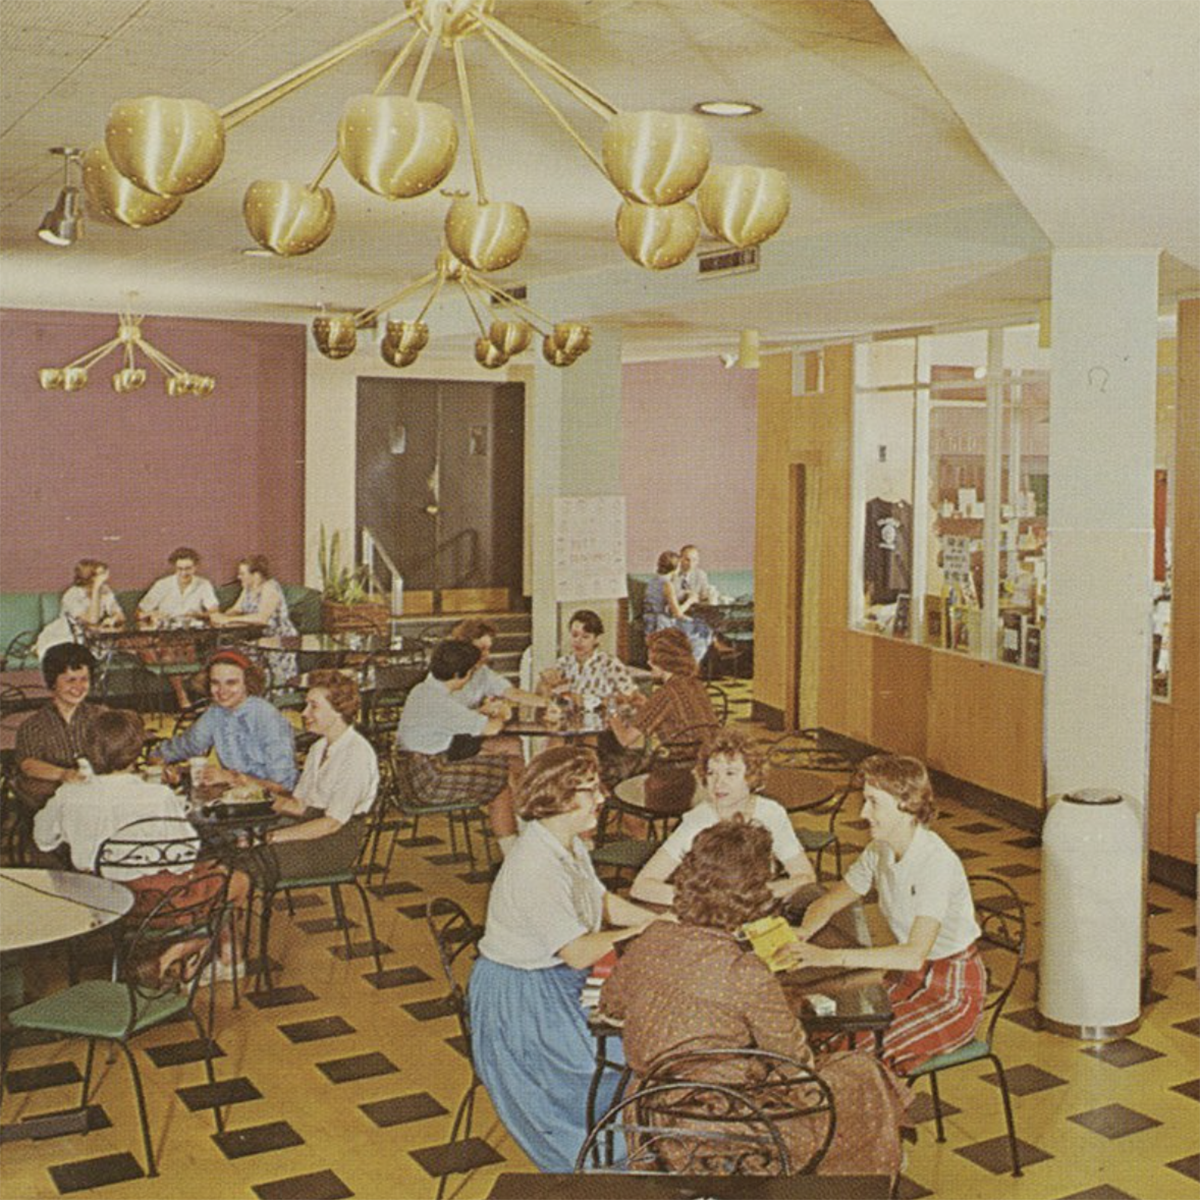 Vintage photograph of a dining hall on campus in the 1950s